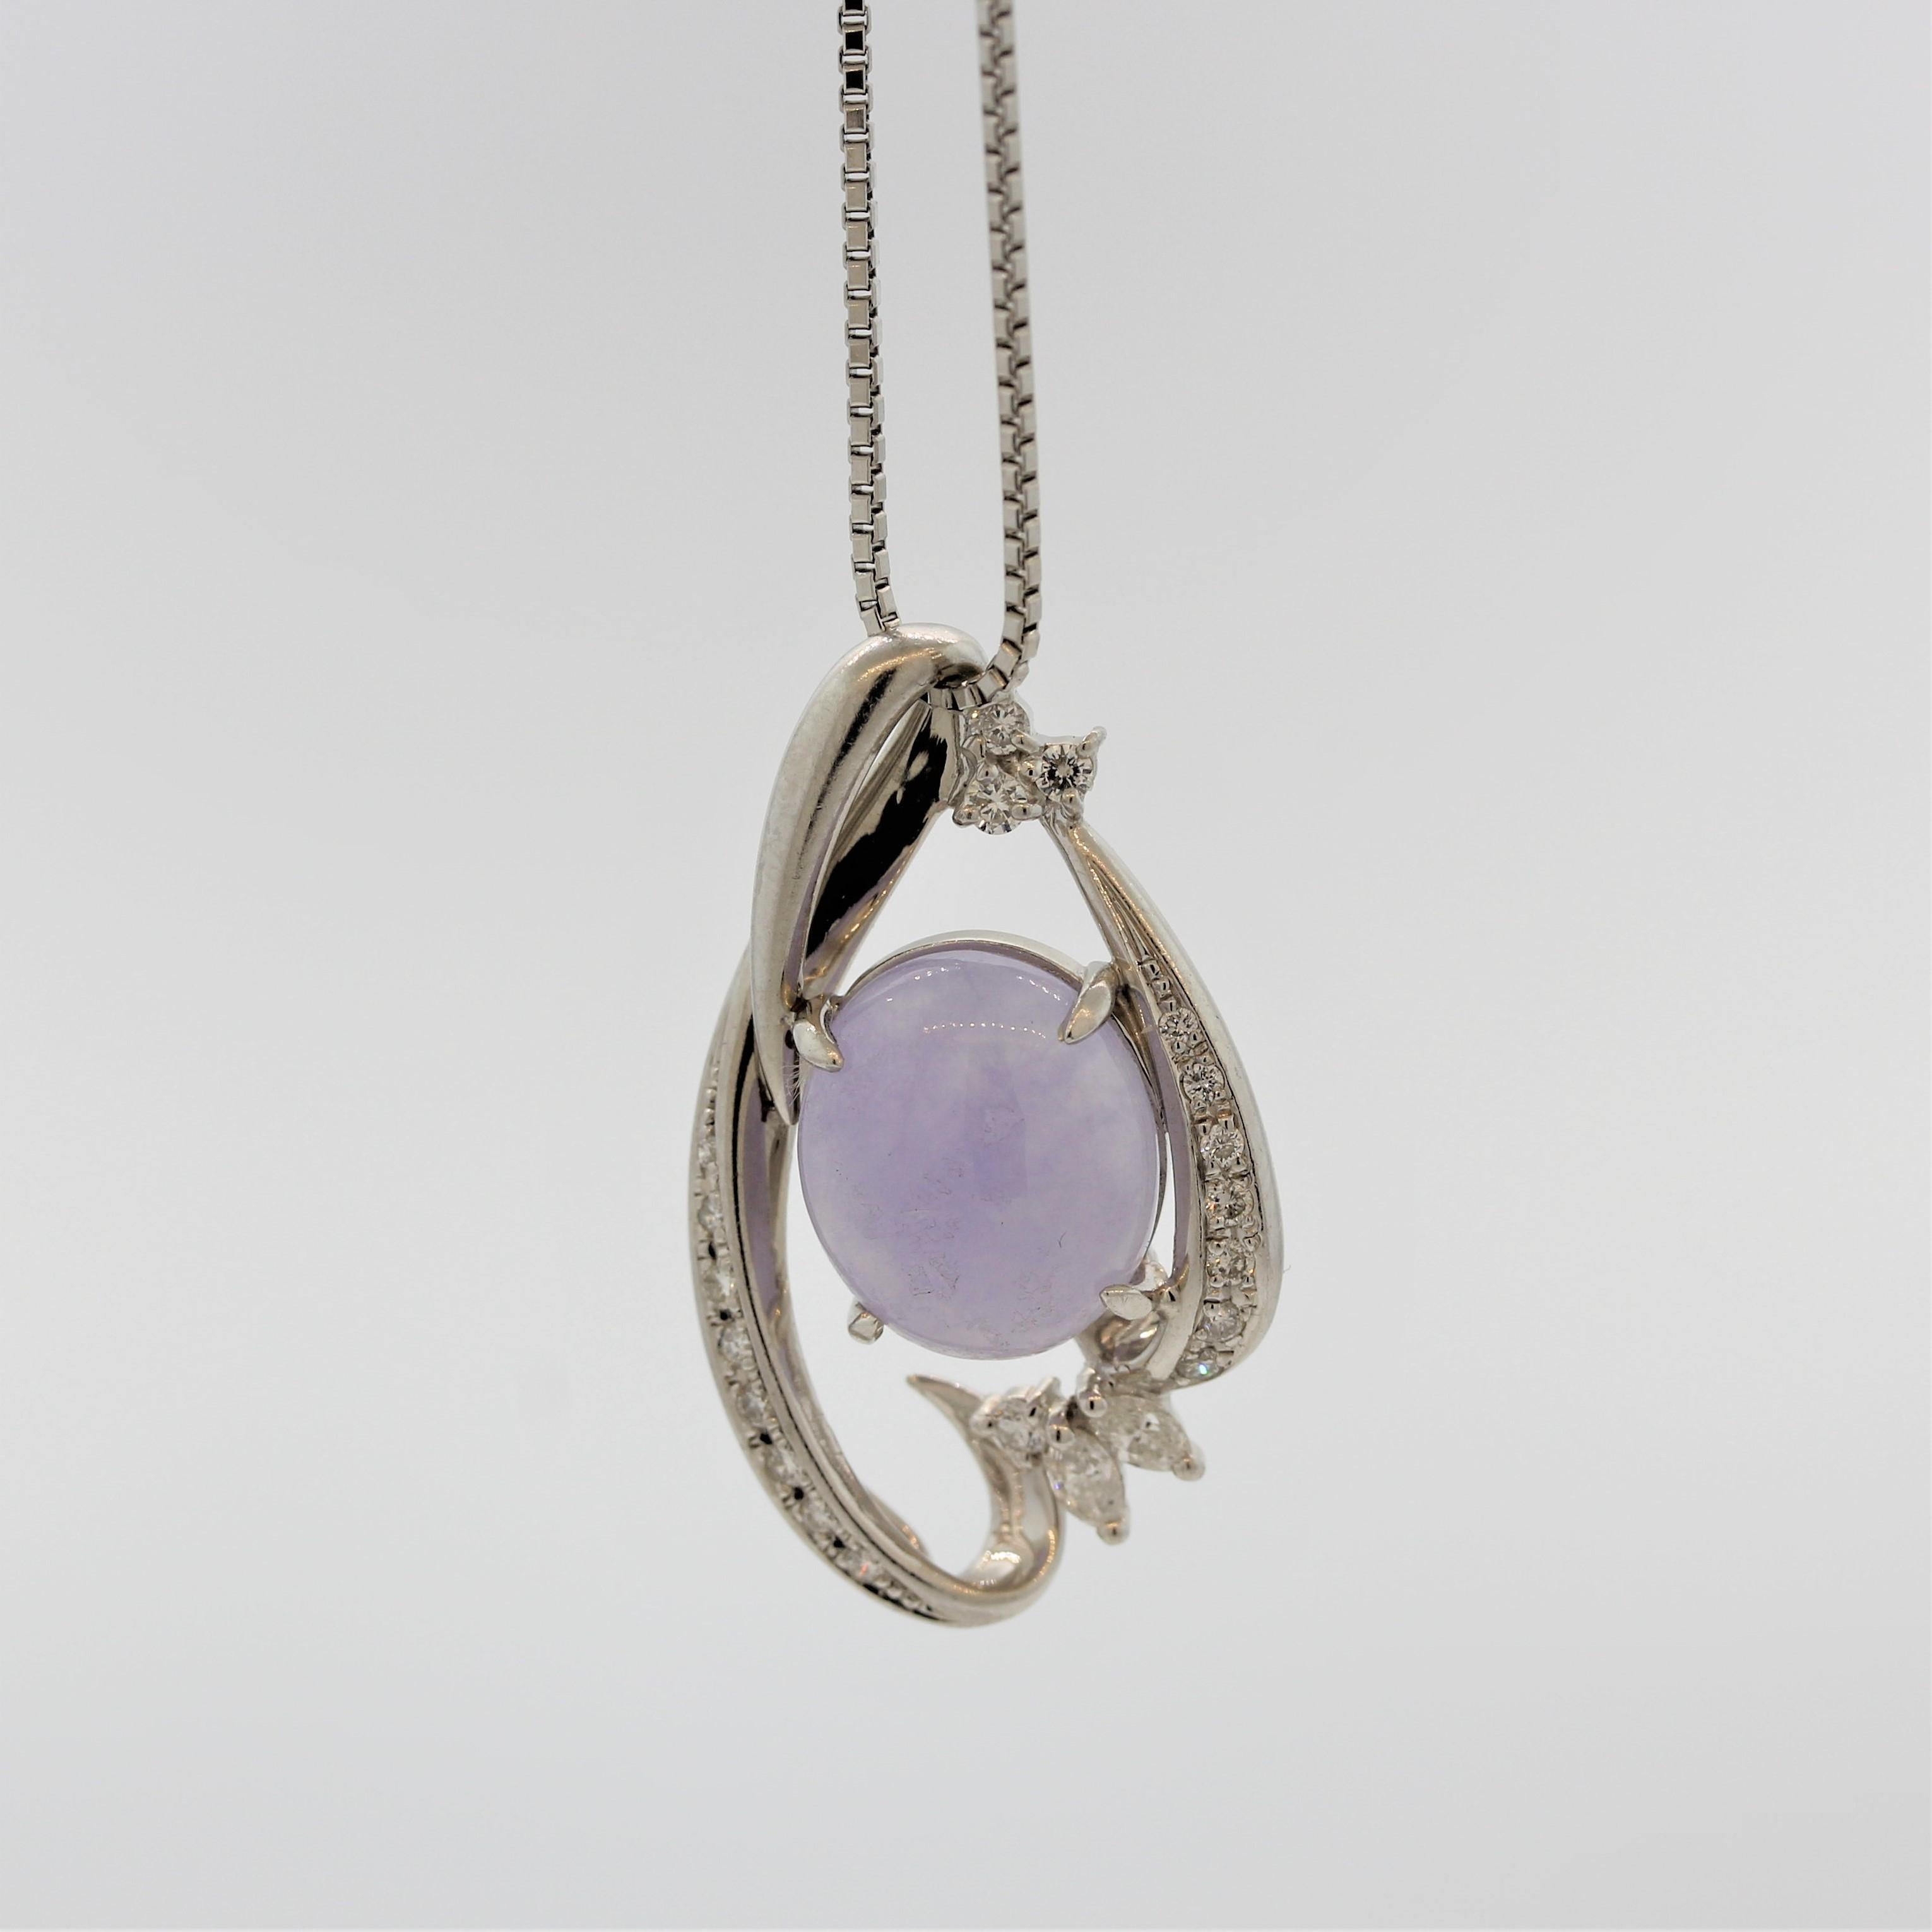 A mesmerizing piece of natural lavender jade takes center stage. It weighs 7.52 carats and appears to glow from its interior, something typical of only fine pieces of jade. It Is accented by 0.45 carats of round brilliant and marquise shaped